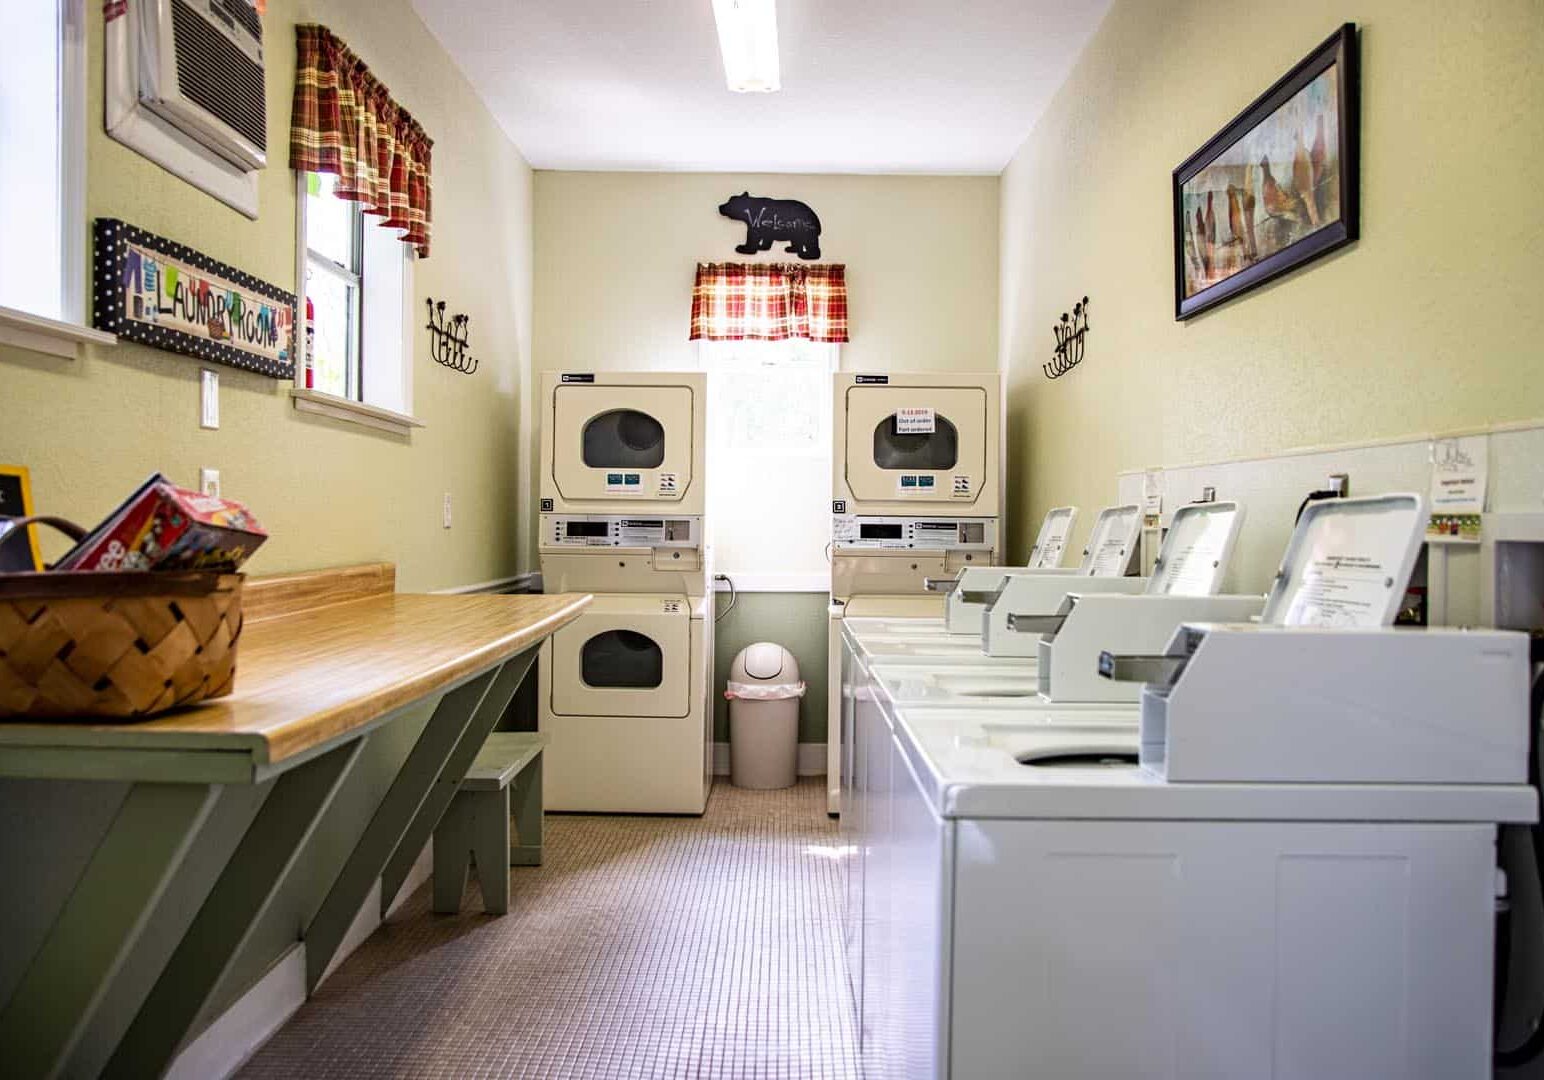 Climate controlled laundry room